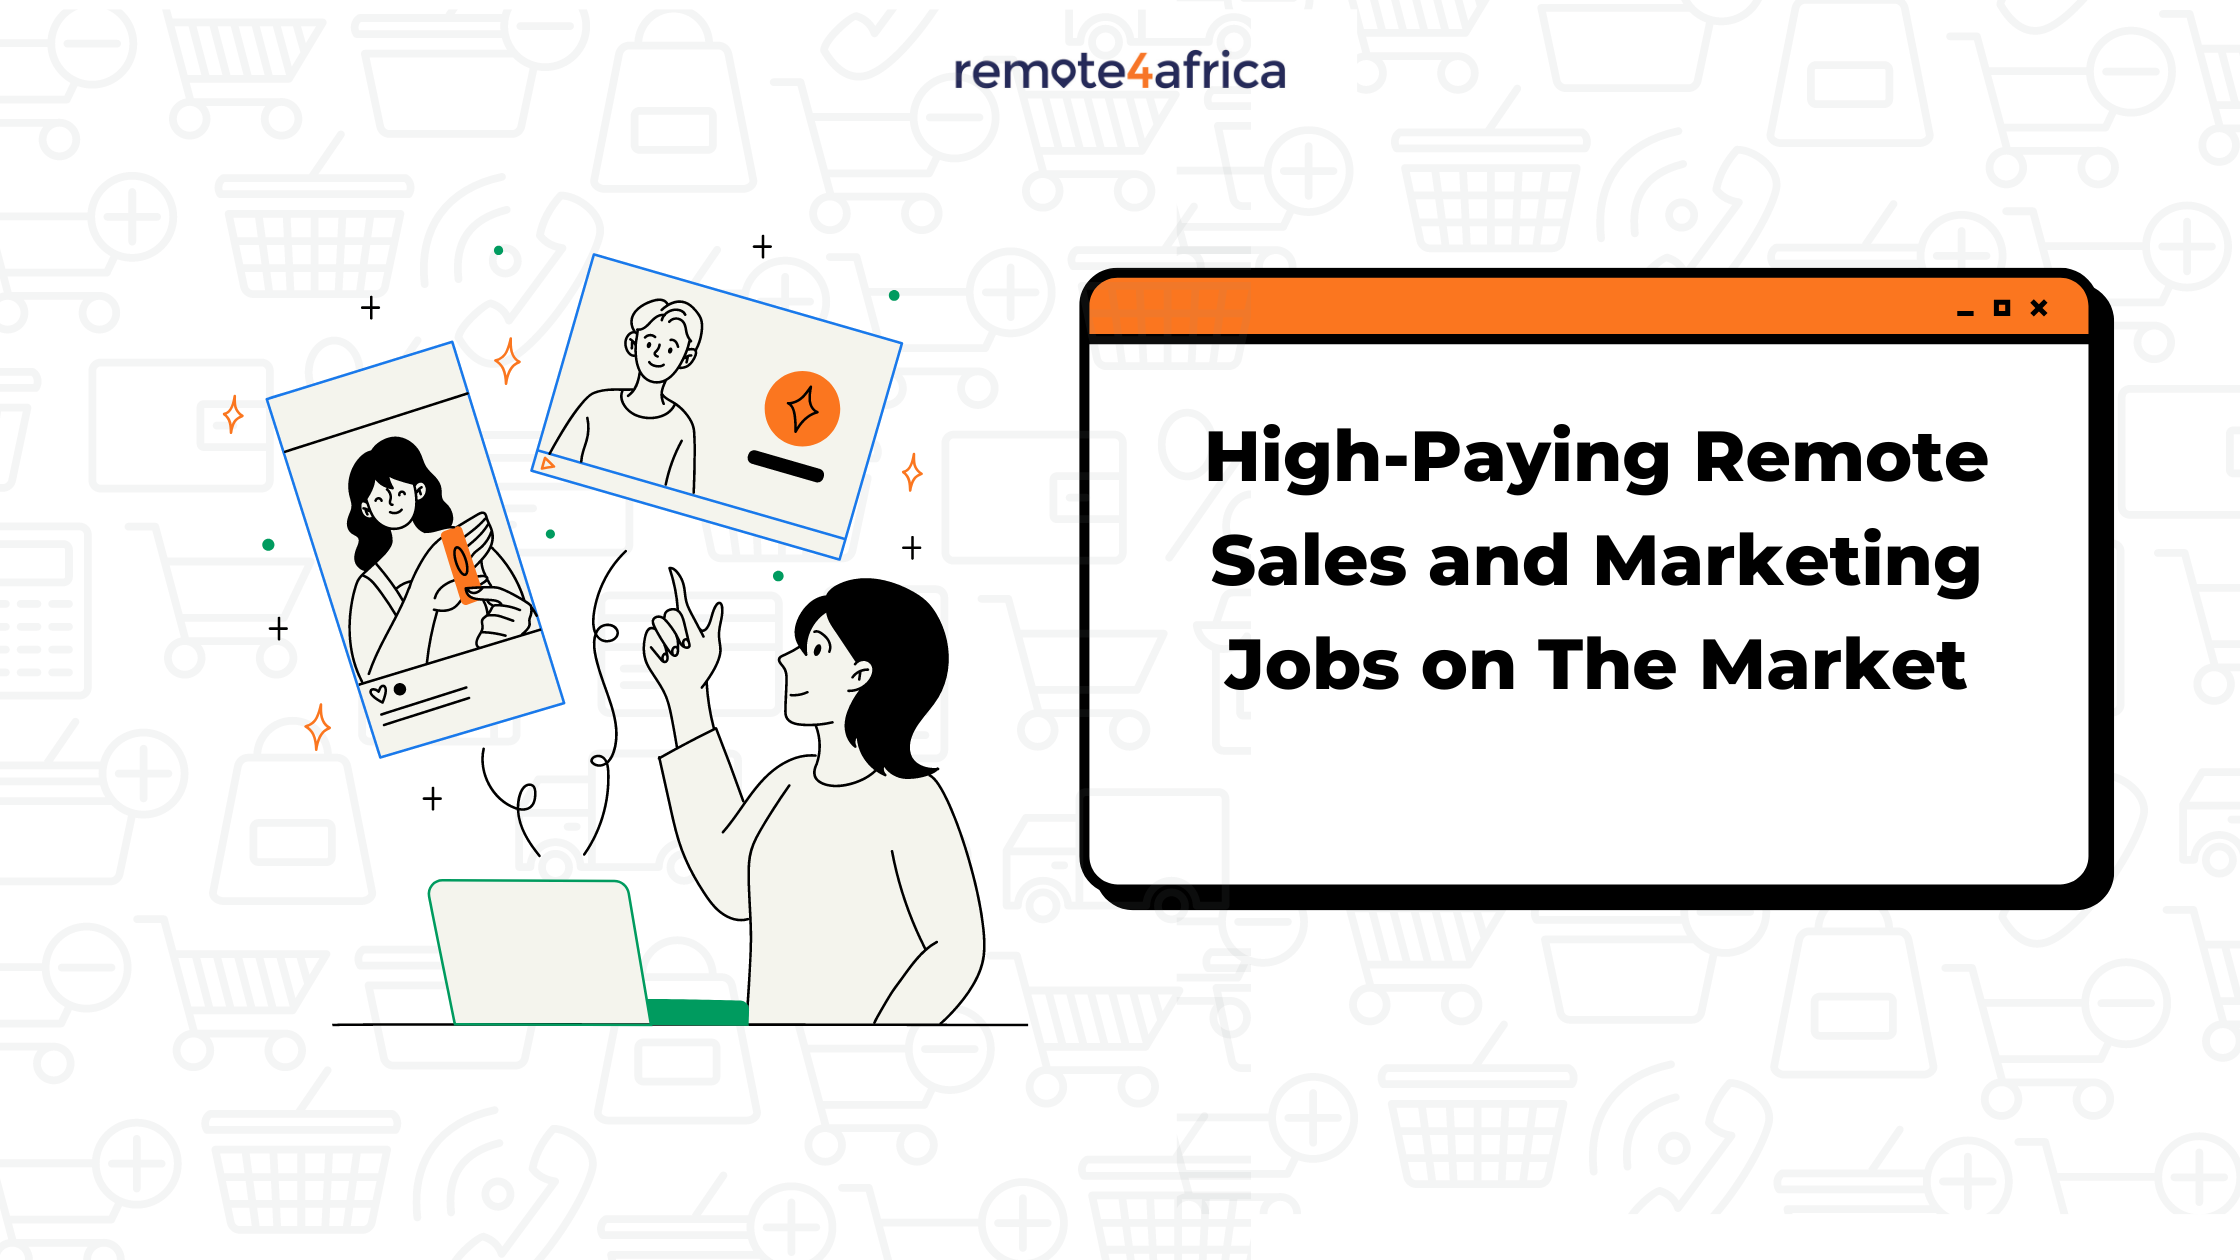 A high-paying remote sales and marketing job